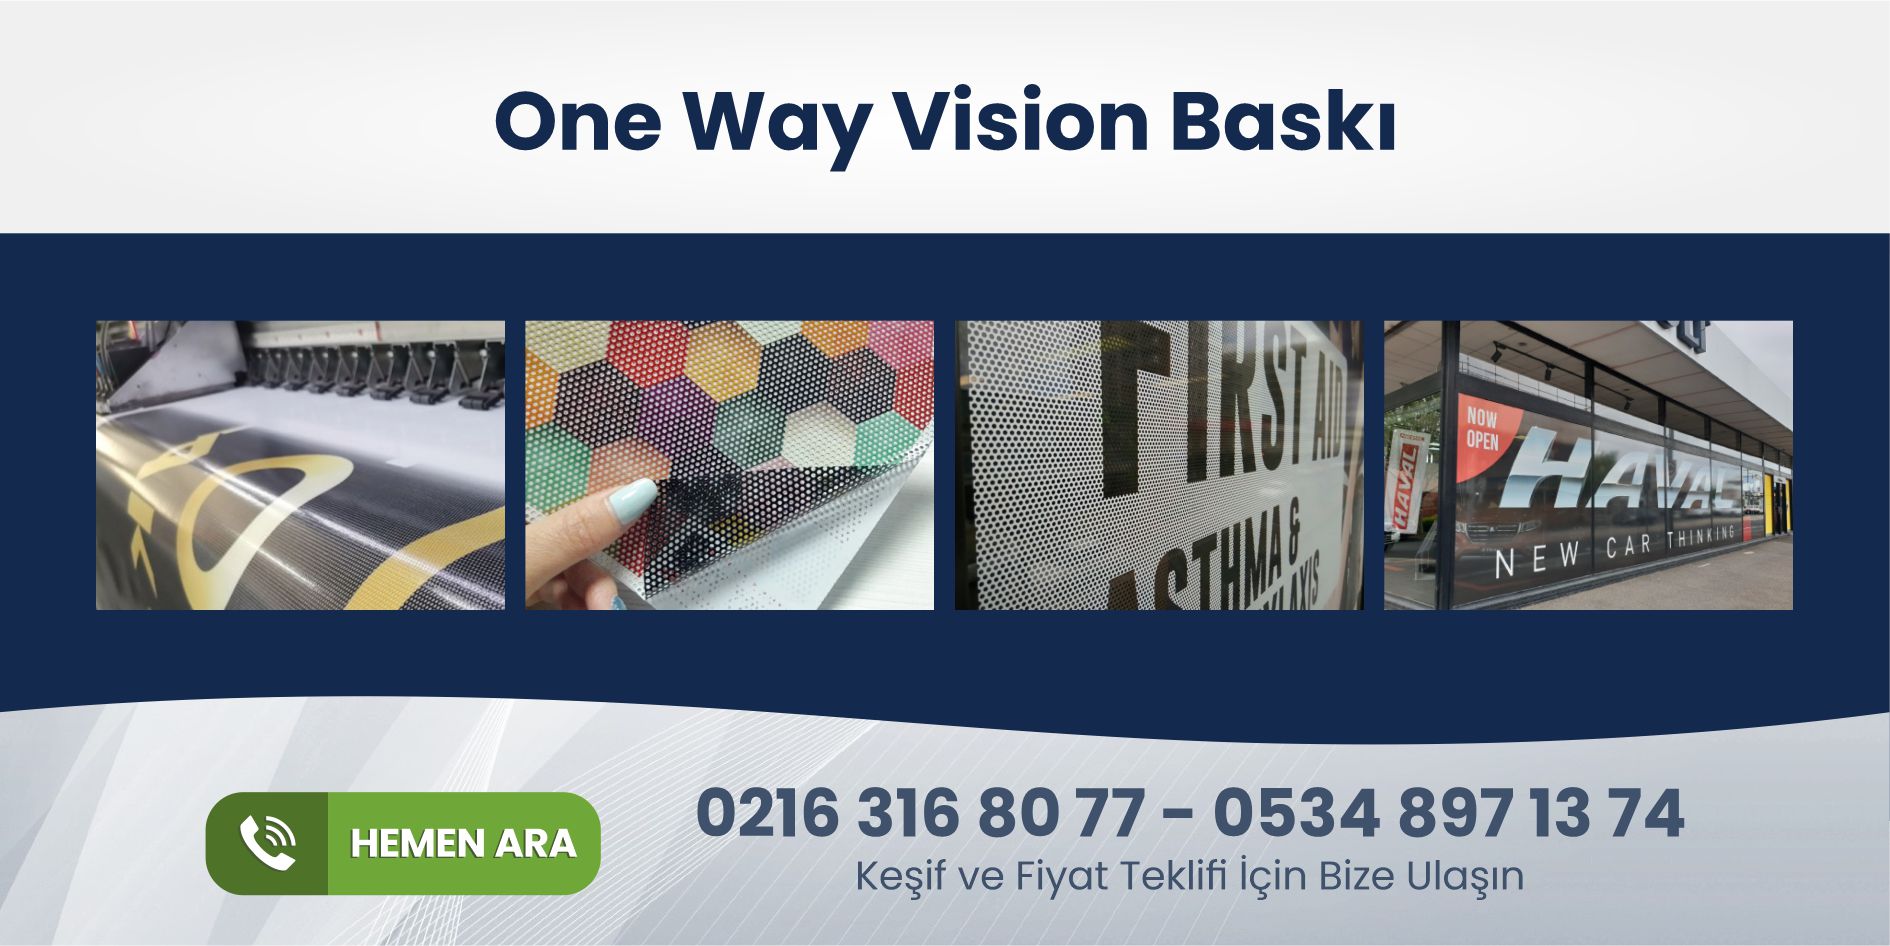 You are currently viewing Maltepe One Way Vision Baskı